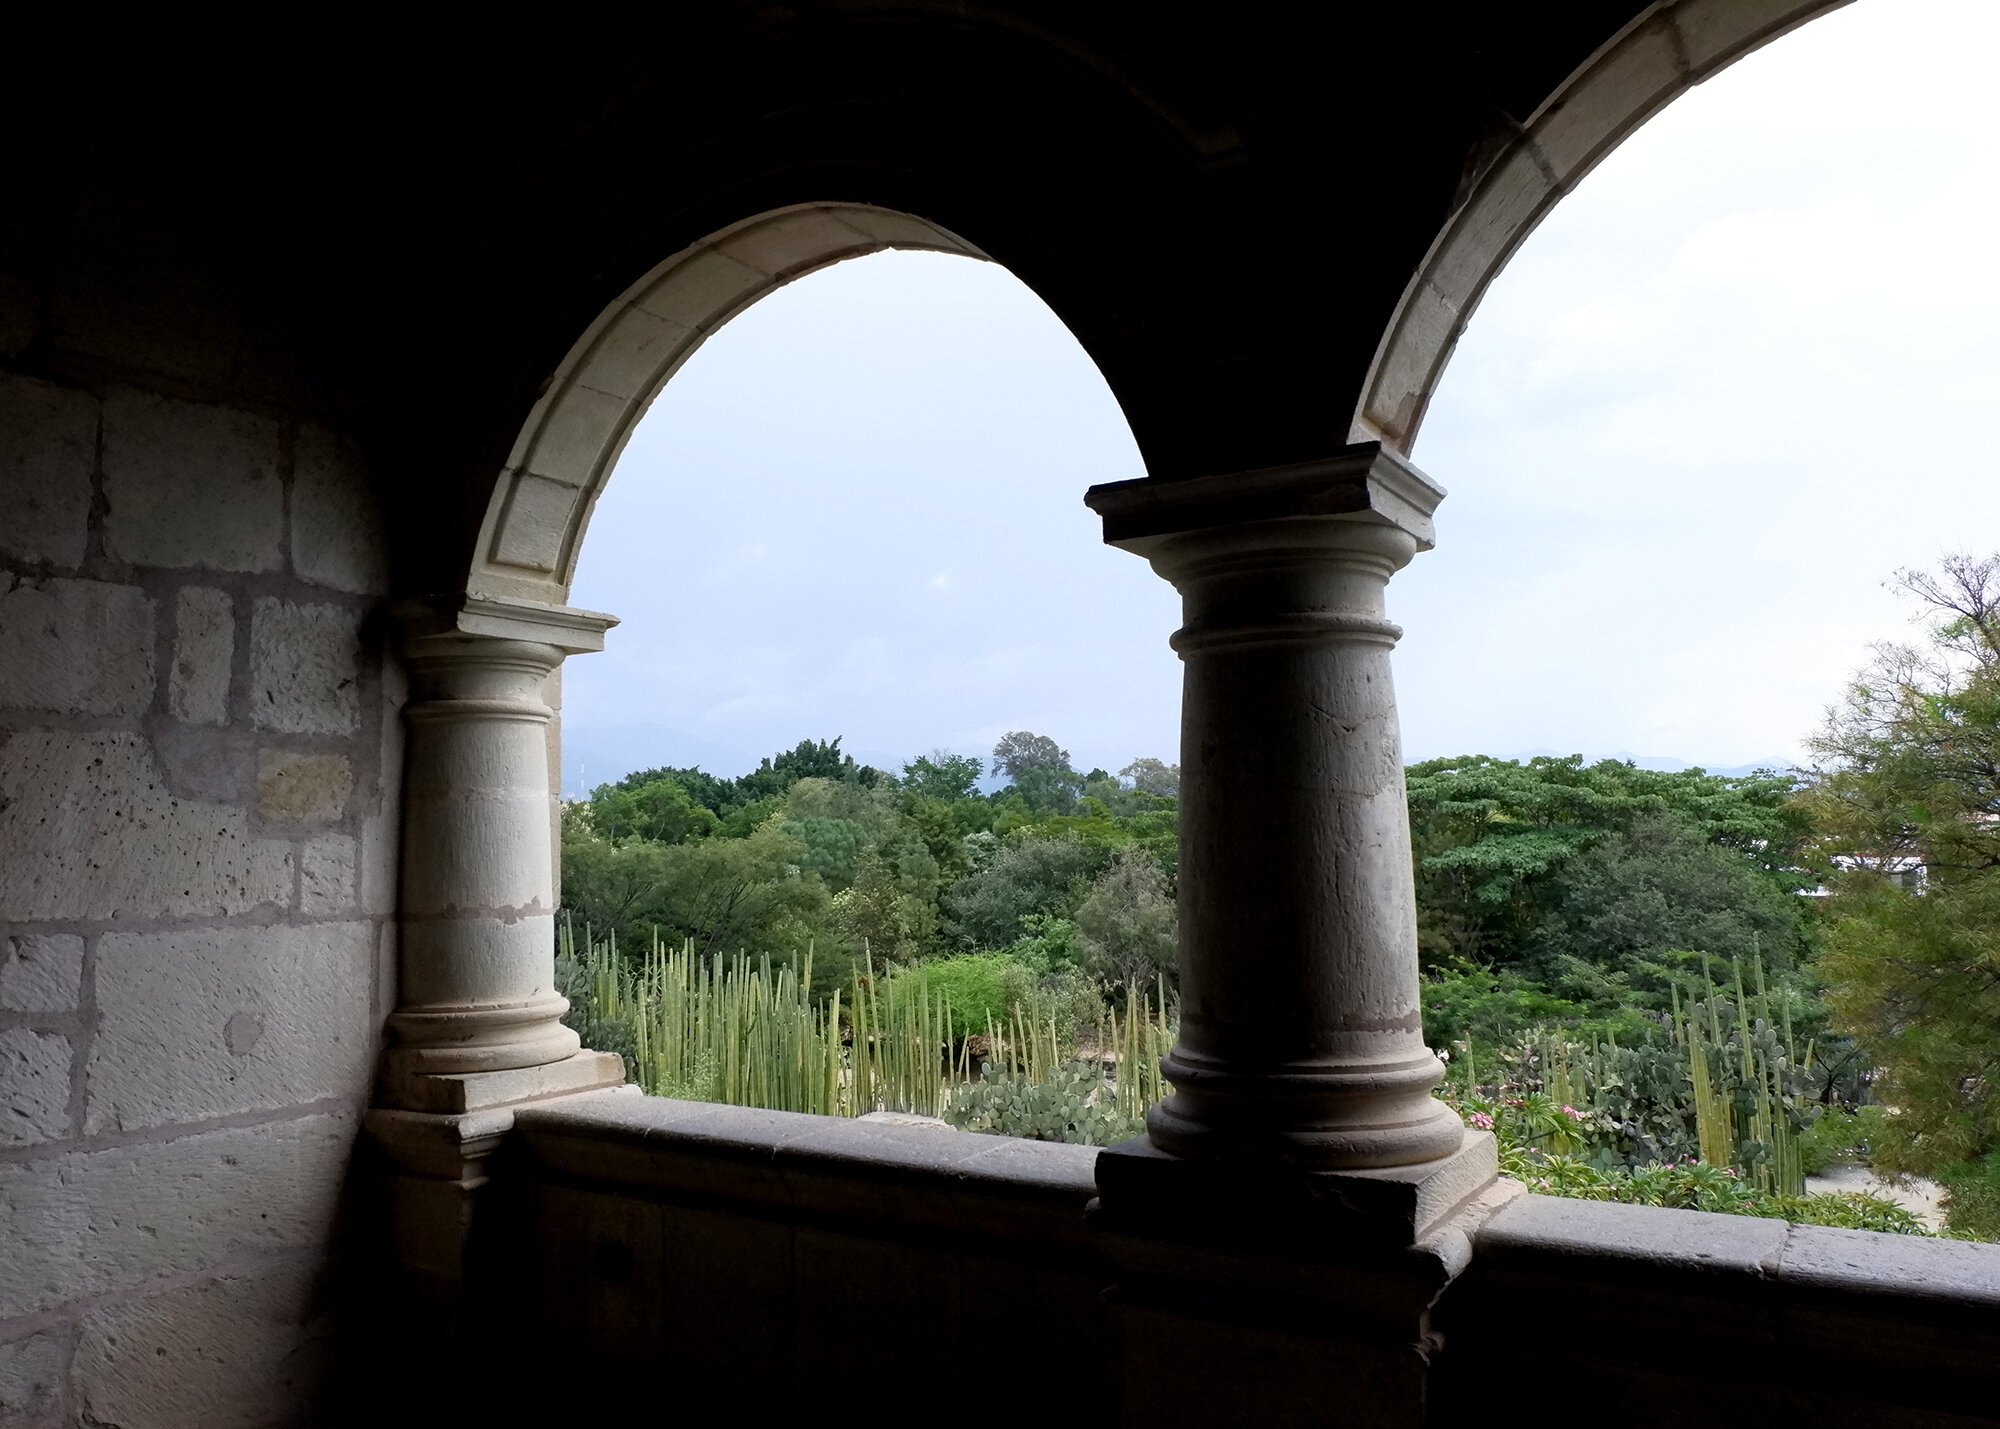 view of the ethnobotanical garden from the Museo de las Culturas